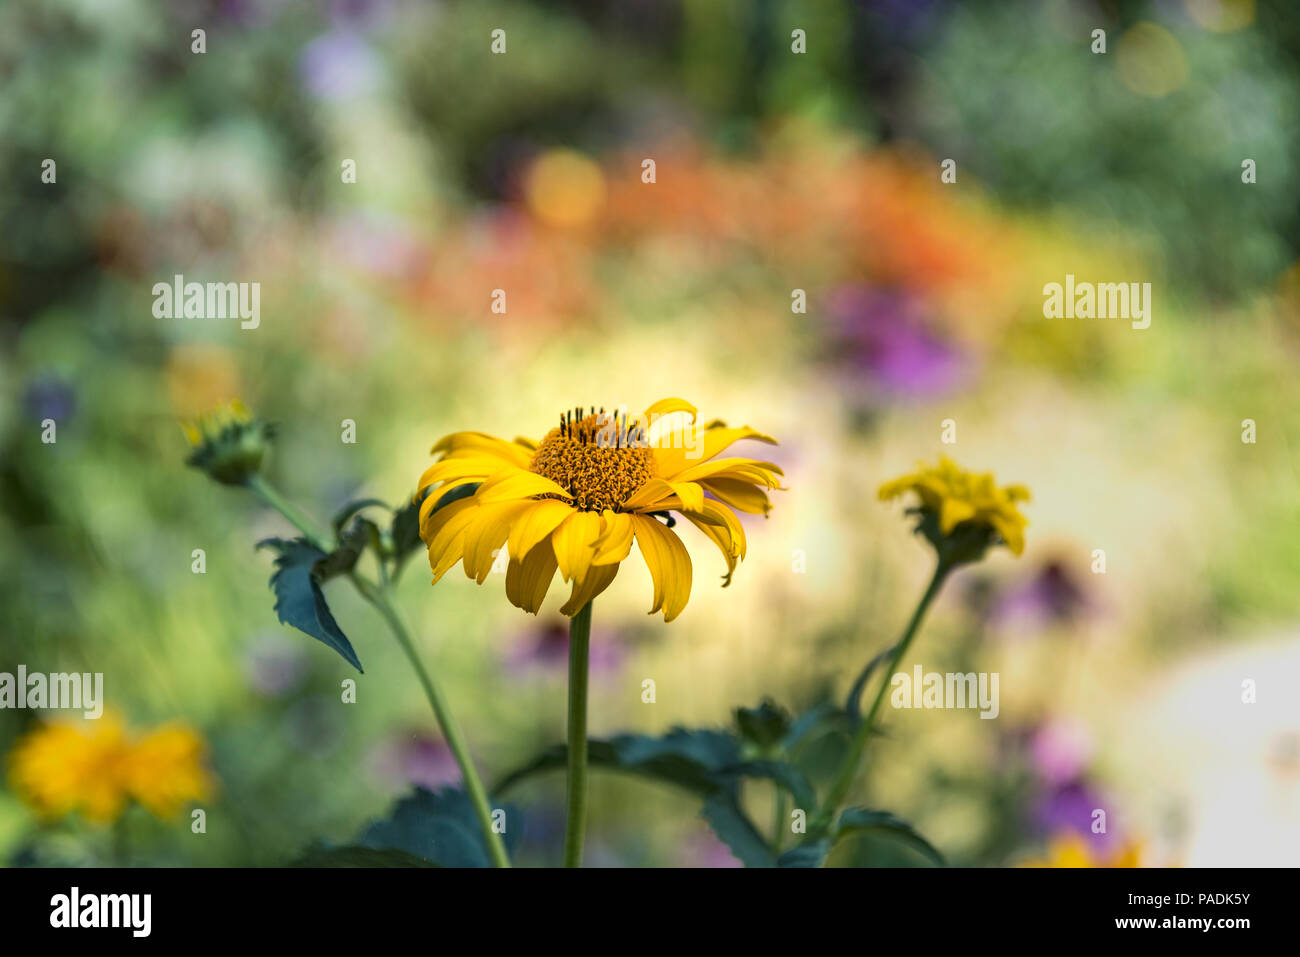 Helianthus, Sunflower, close up with a bokeh background, defocussed. Stock Photo